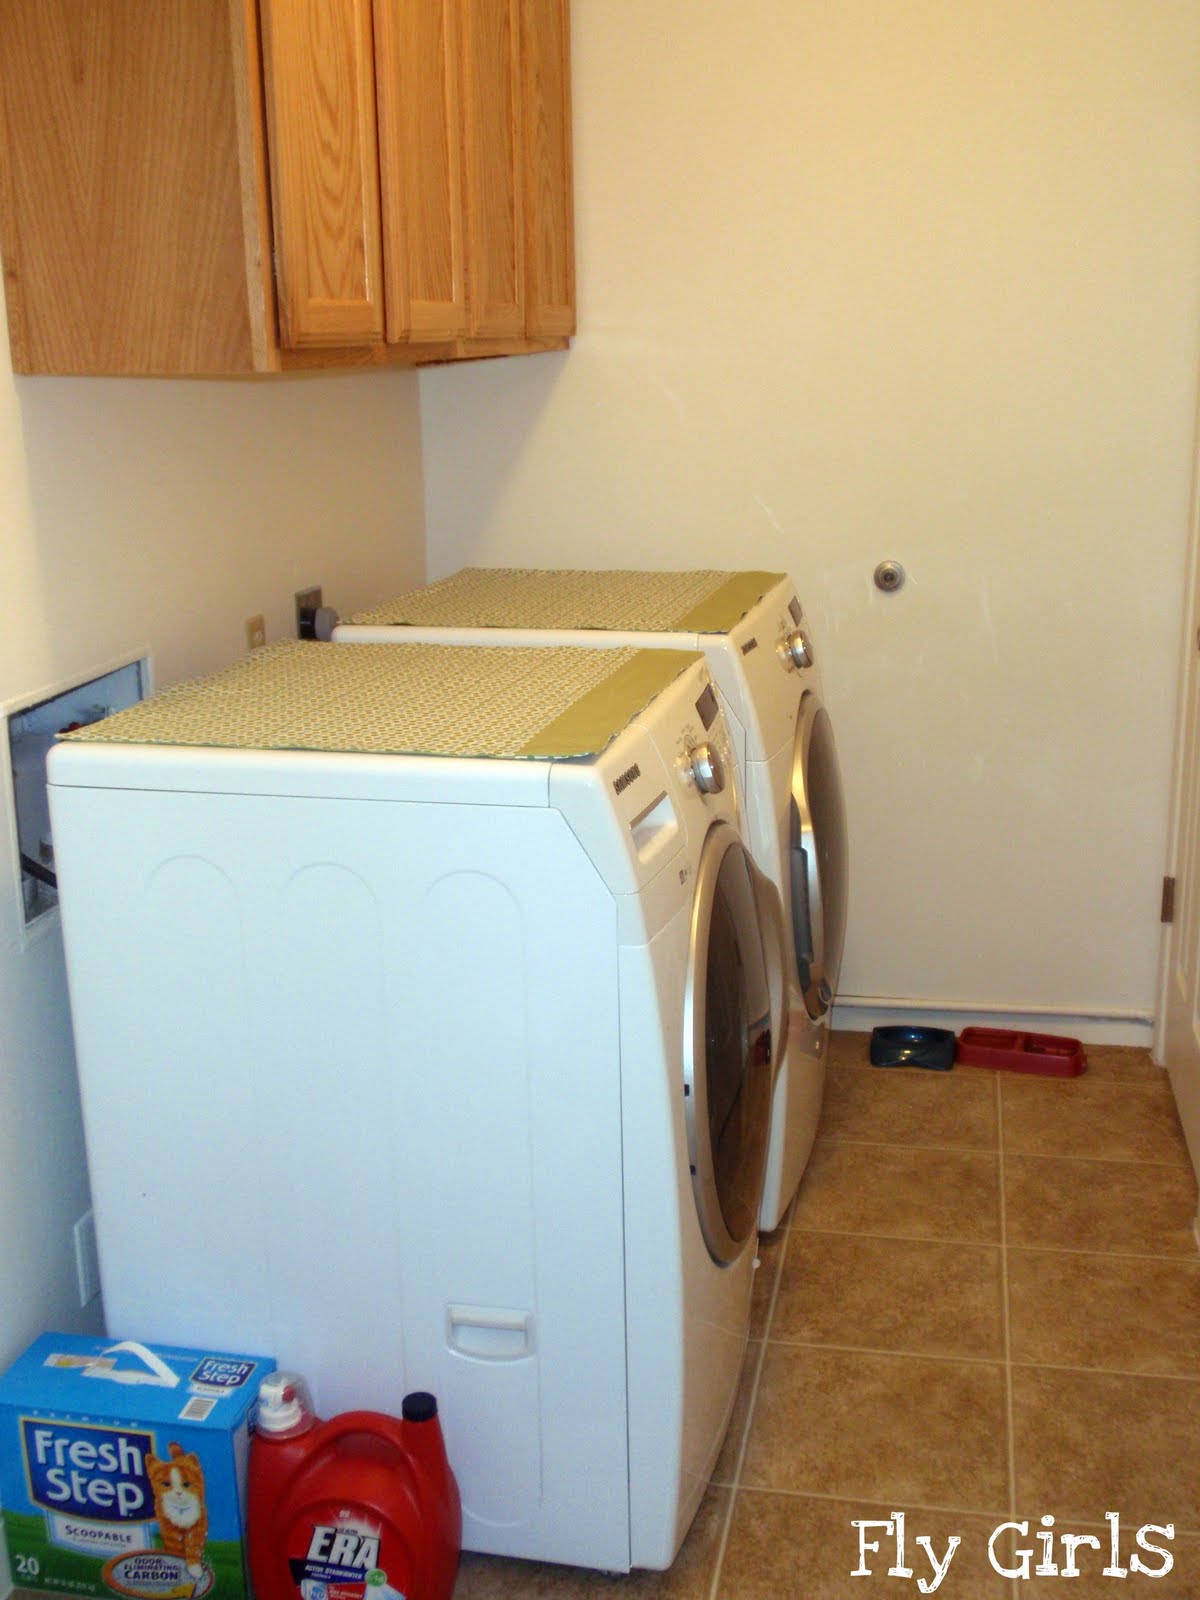 Washer And Dryer Size